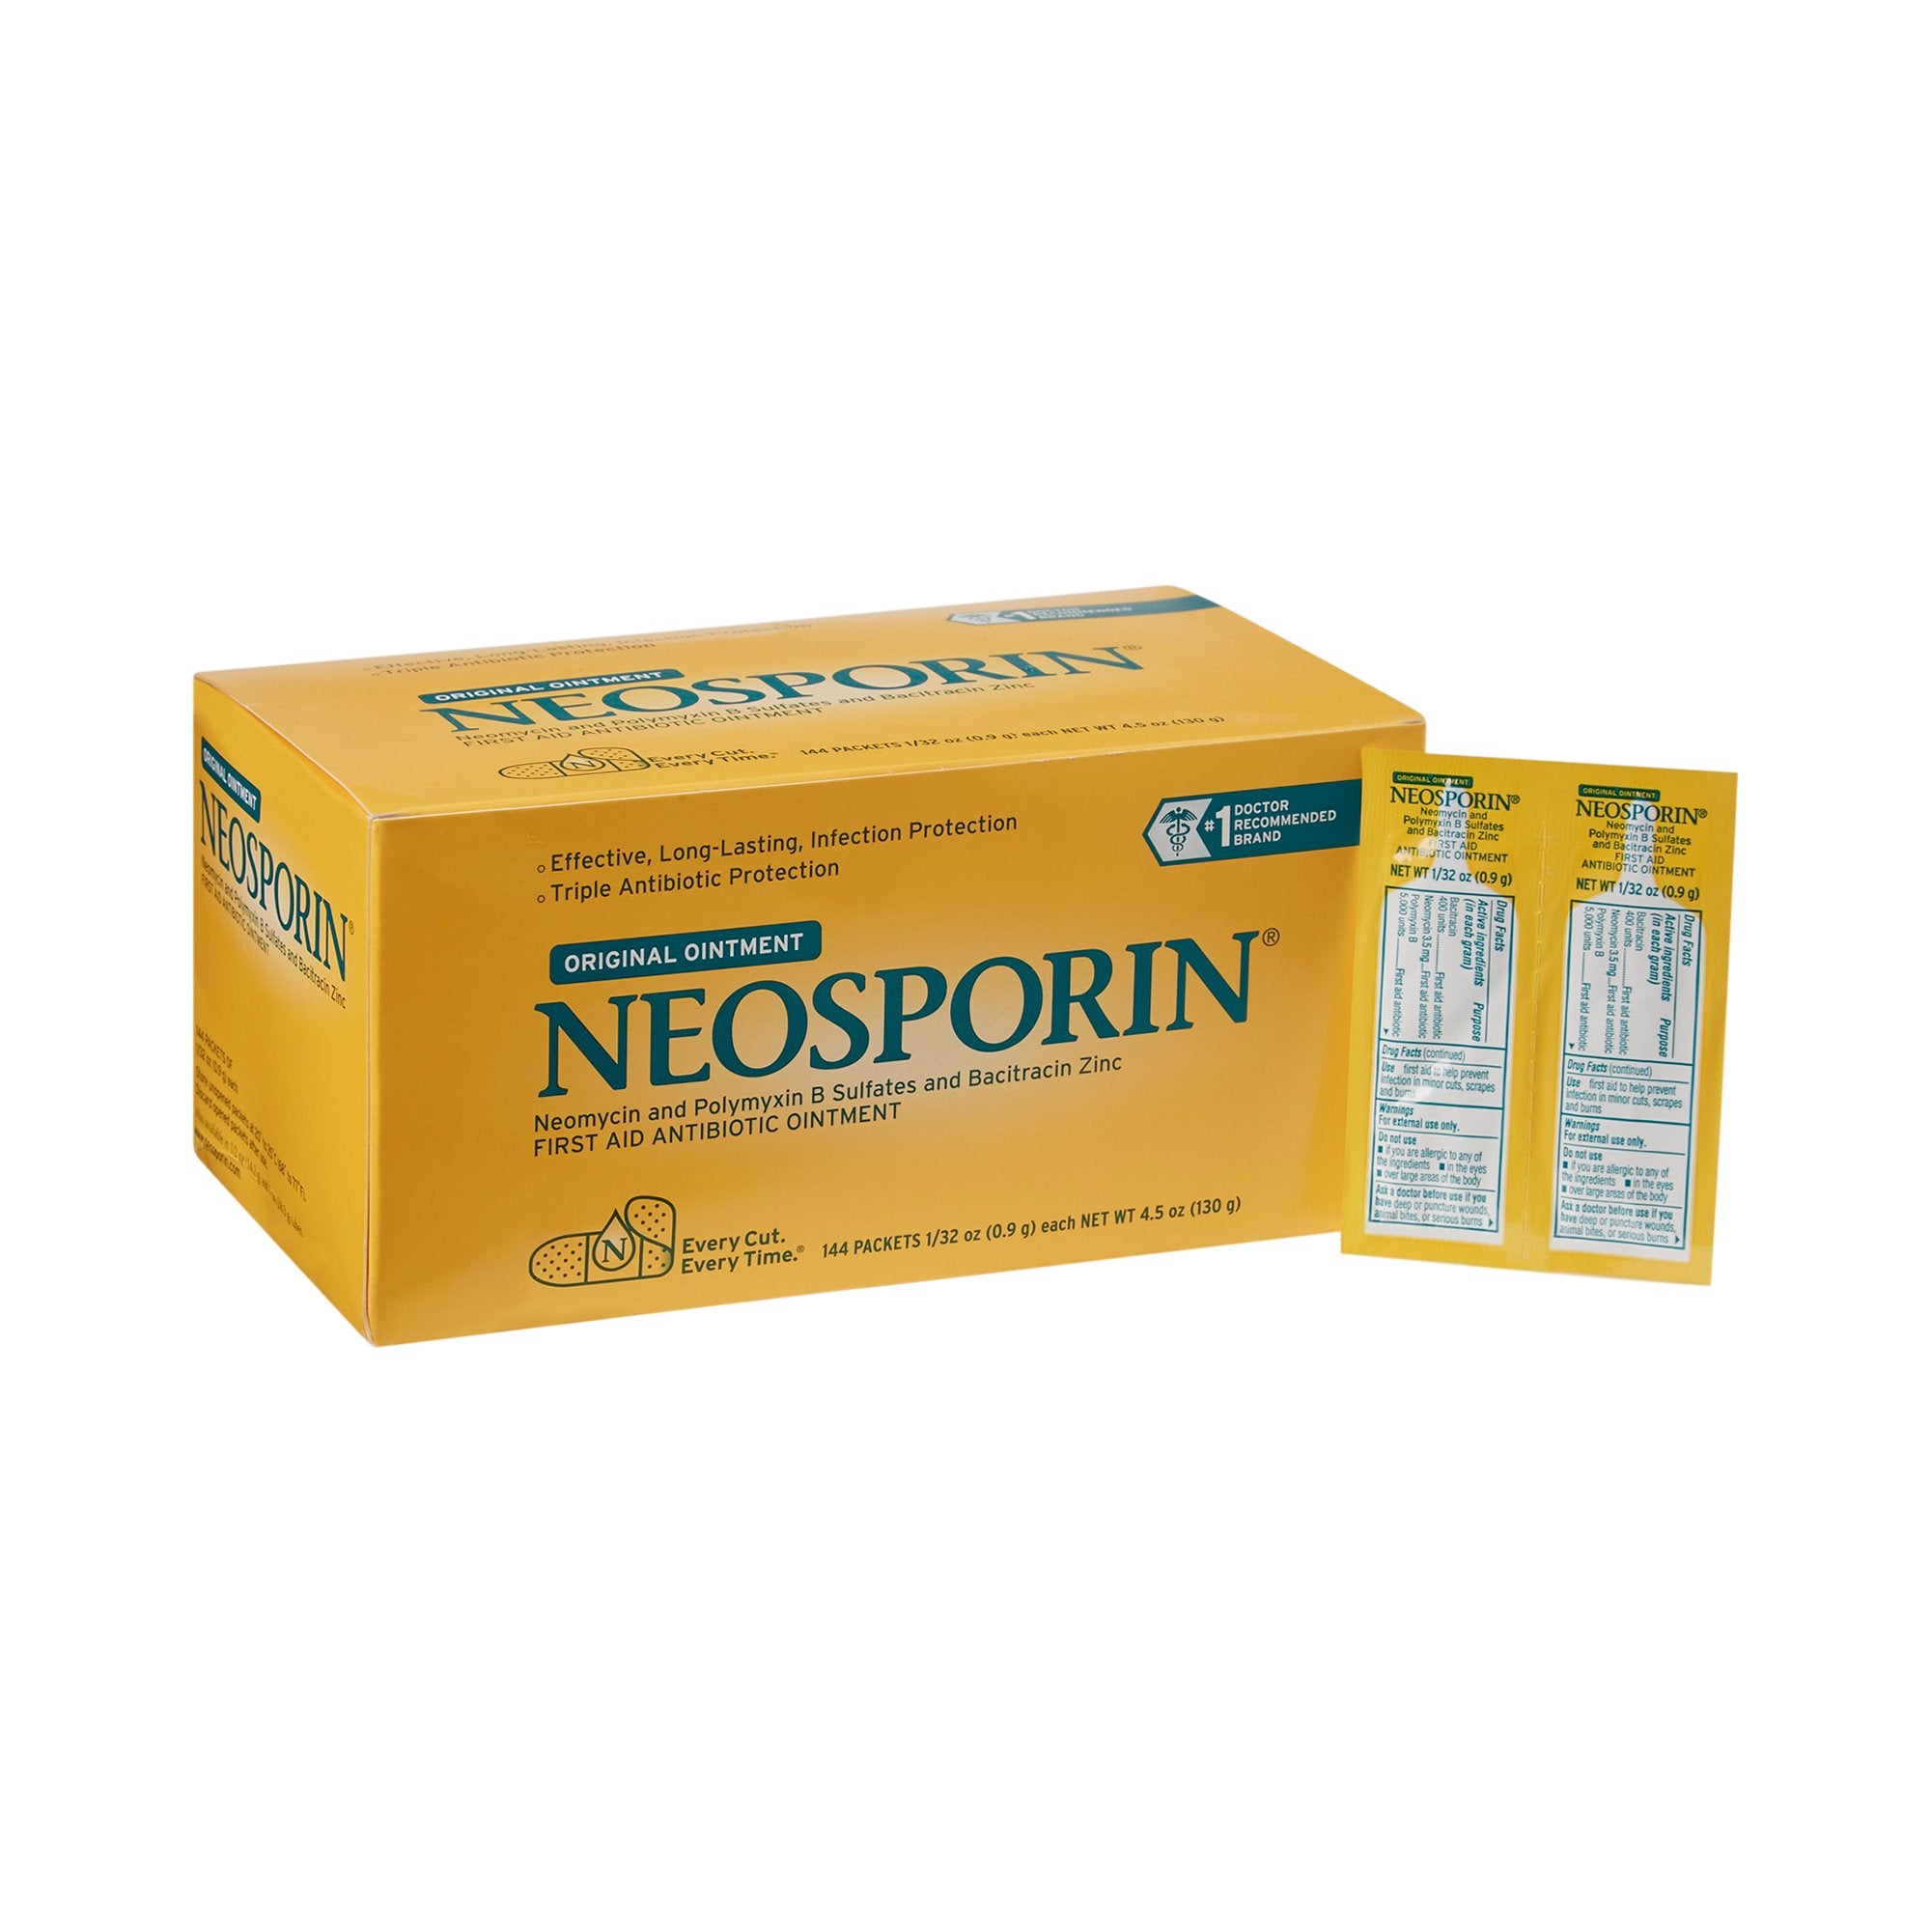 First Aid Antibiotic Neosporin Ointment 0.9 Gram Individual Packet